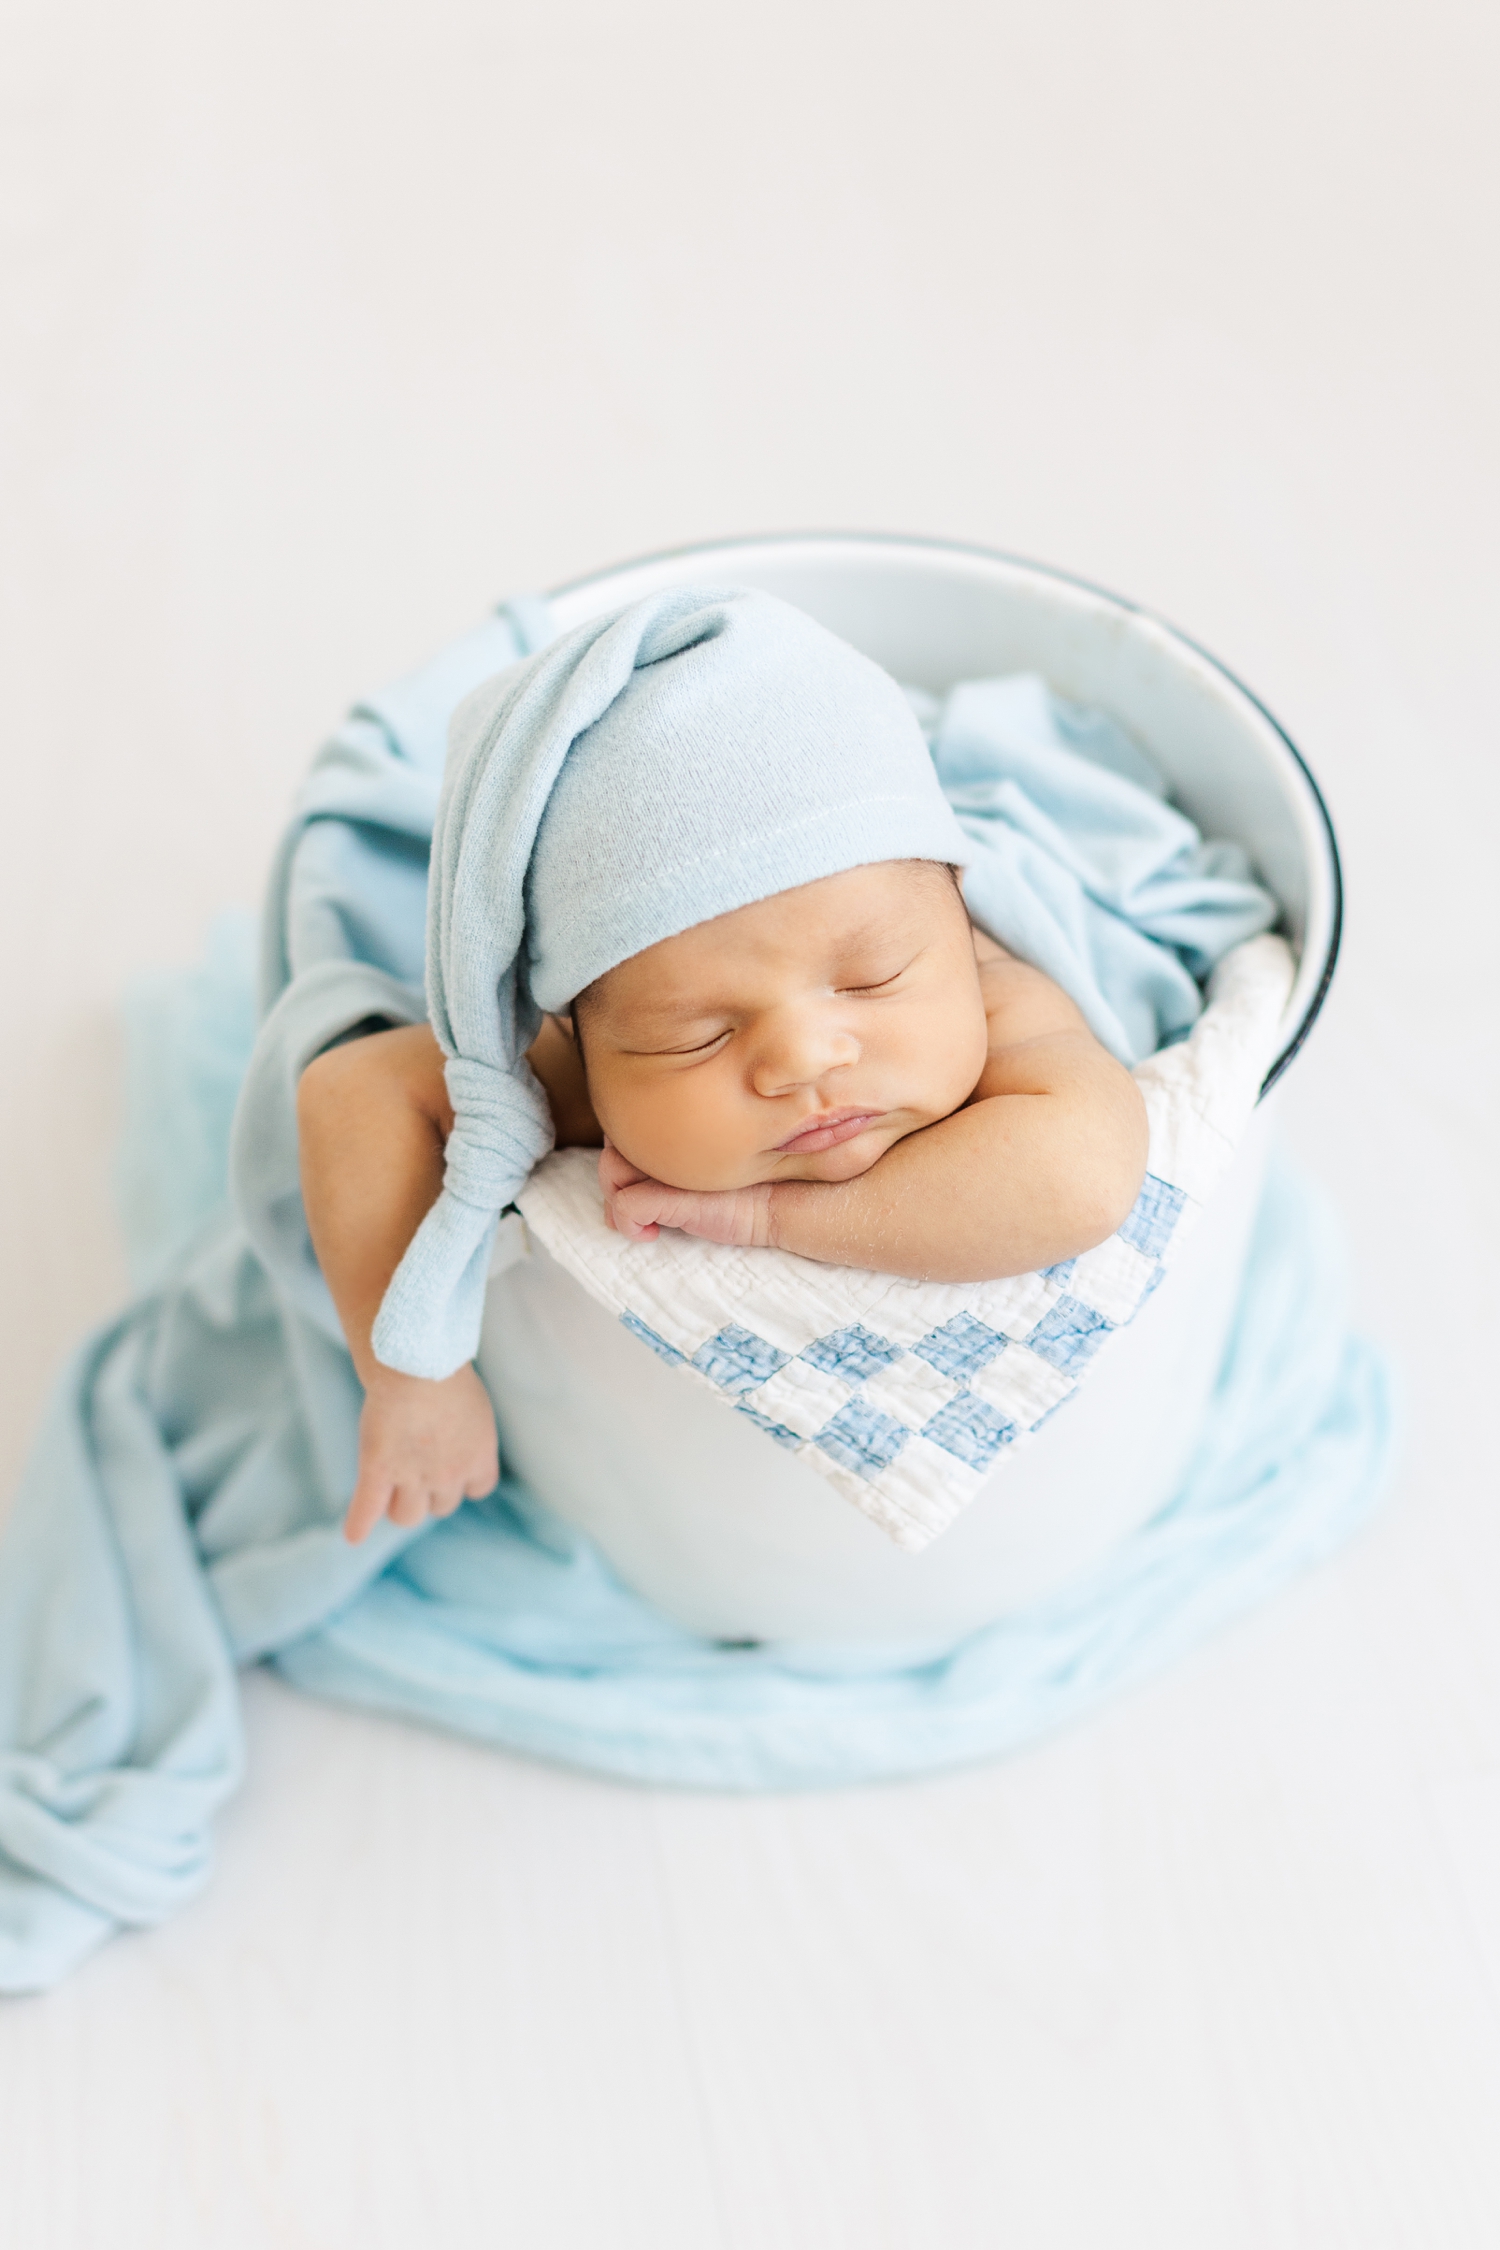 Baby Zachary nestled in a white bucket with a white and blue patch work quilt wearing a blue night cap and a blue swaddle draped over him and the bucket | CB Studio